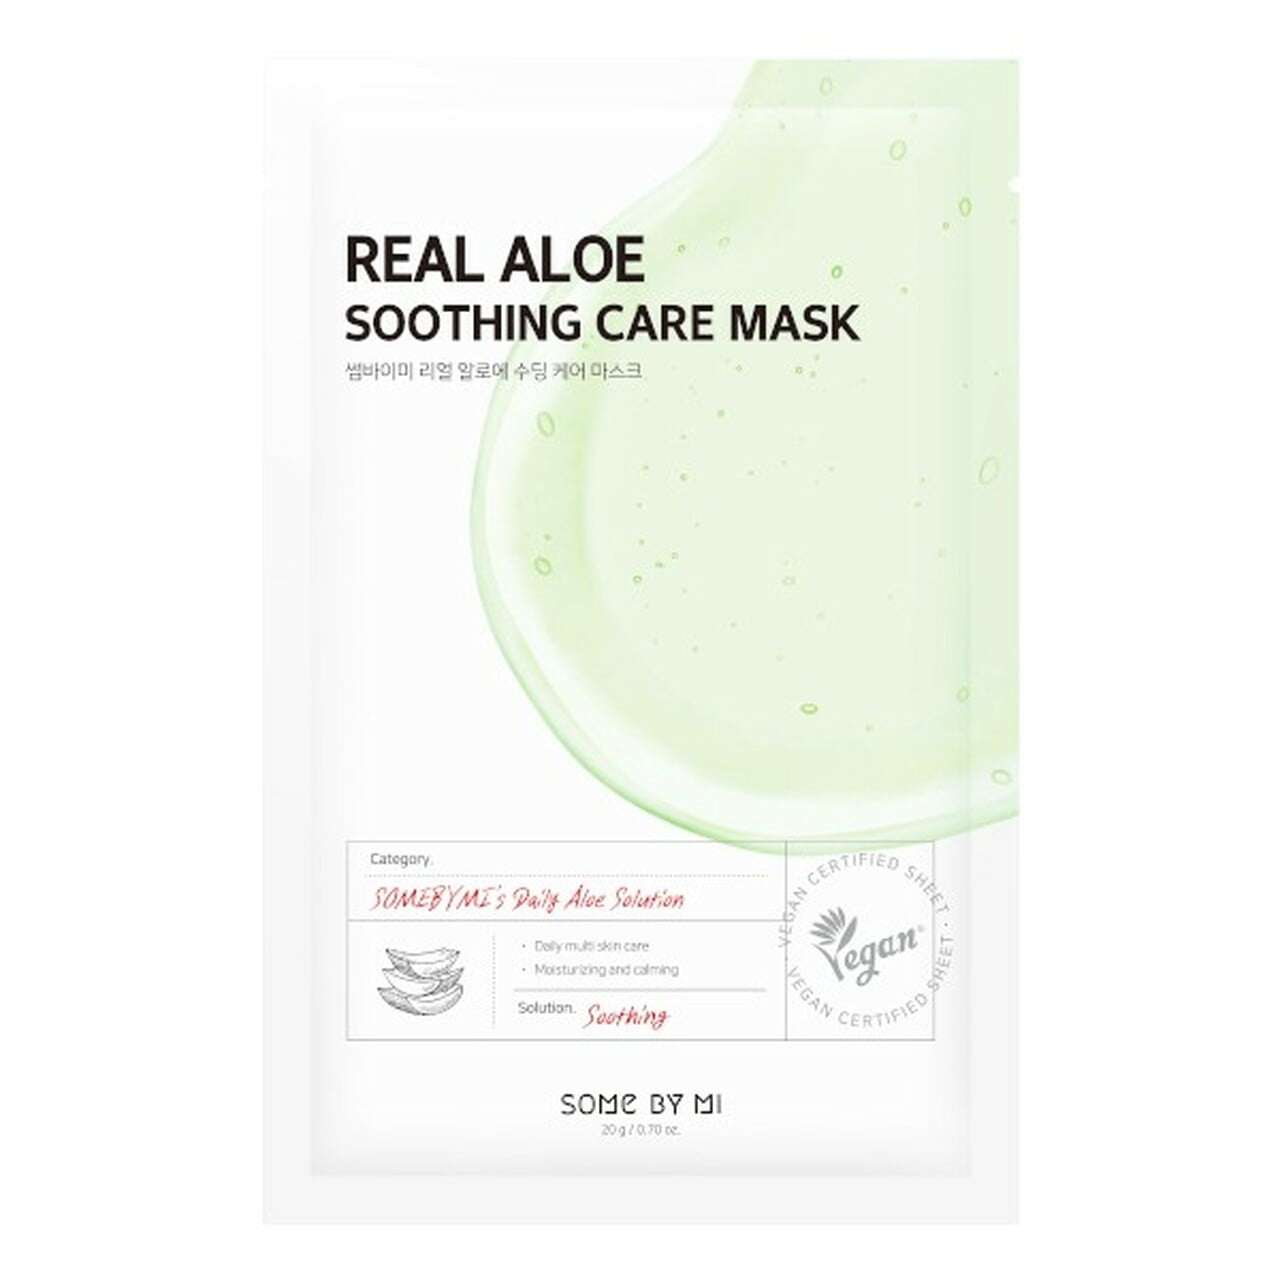 Real Aloe Soothing Care Mask | Some By Mi my-k.ro/ imagine noua